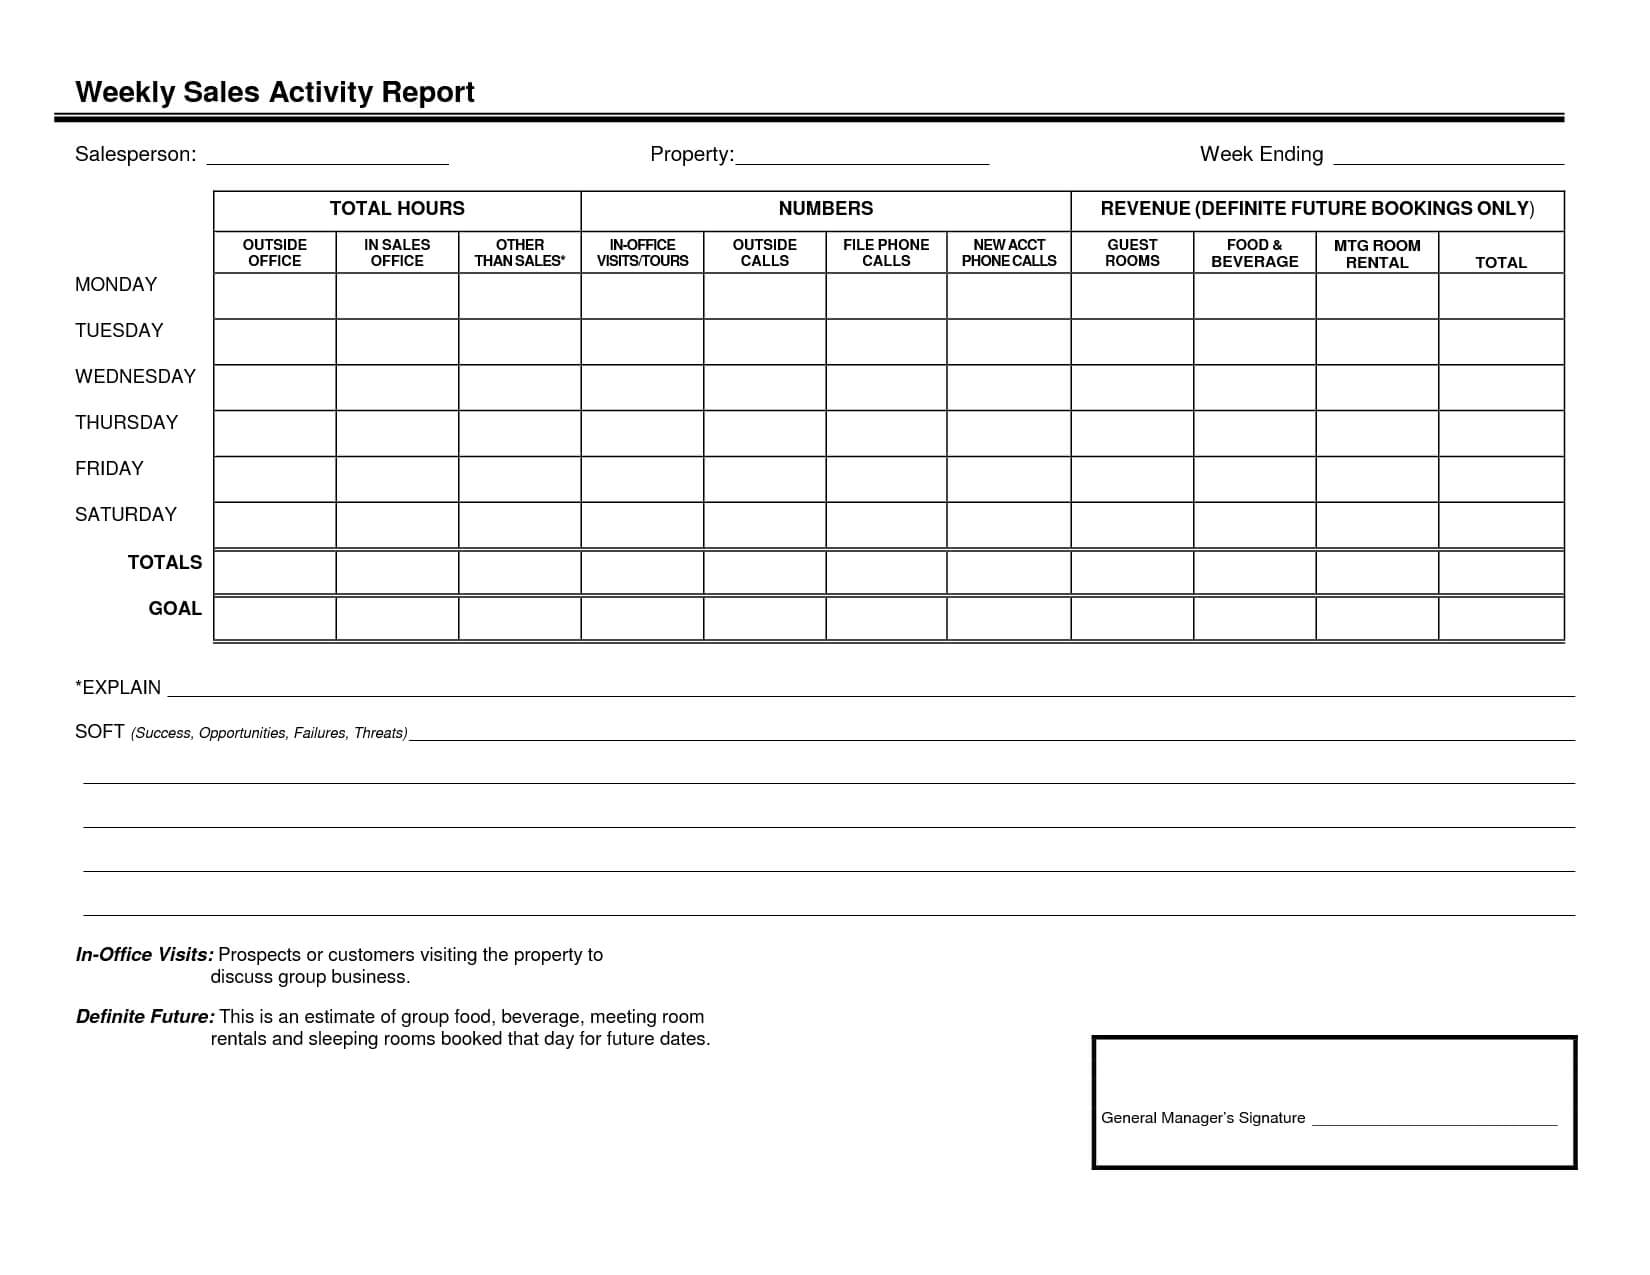 012 Sales Call Reporting Template Weekly Activity Report For Daily Sales Call Report Template Free Download